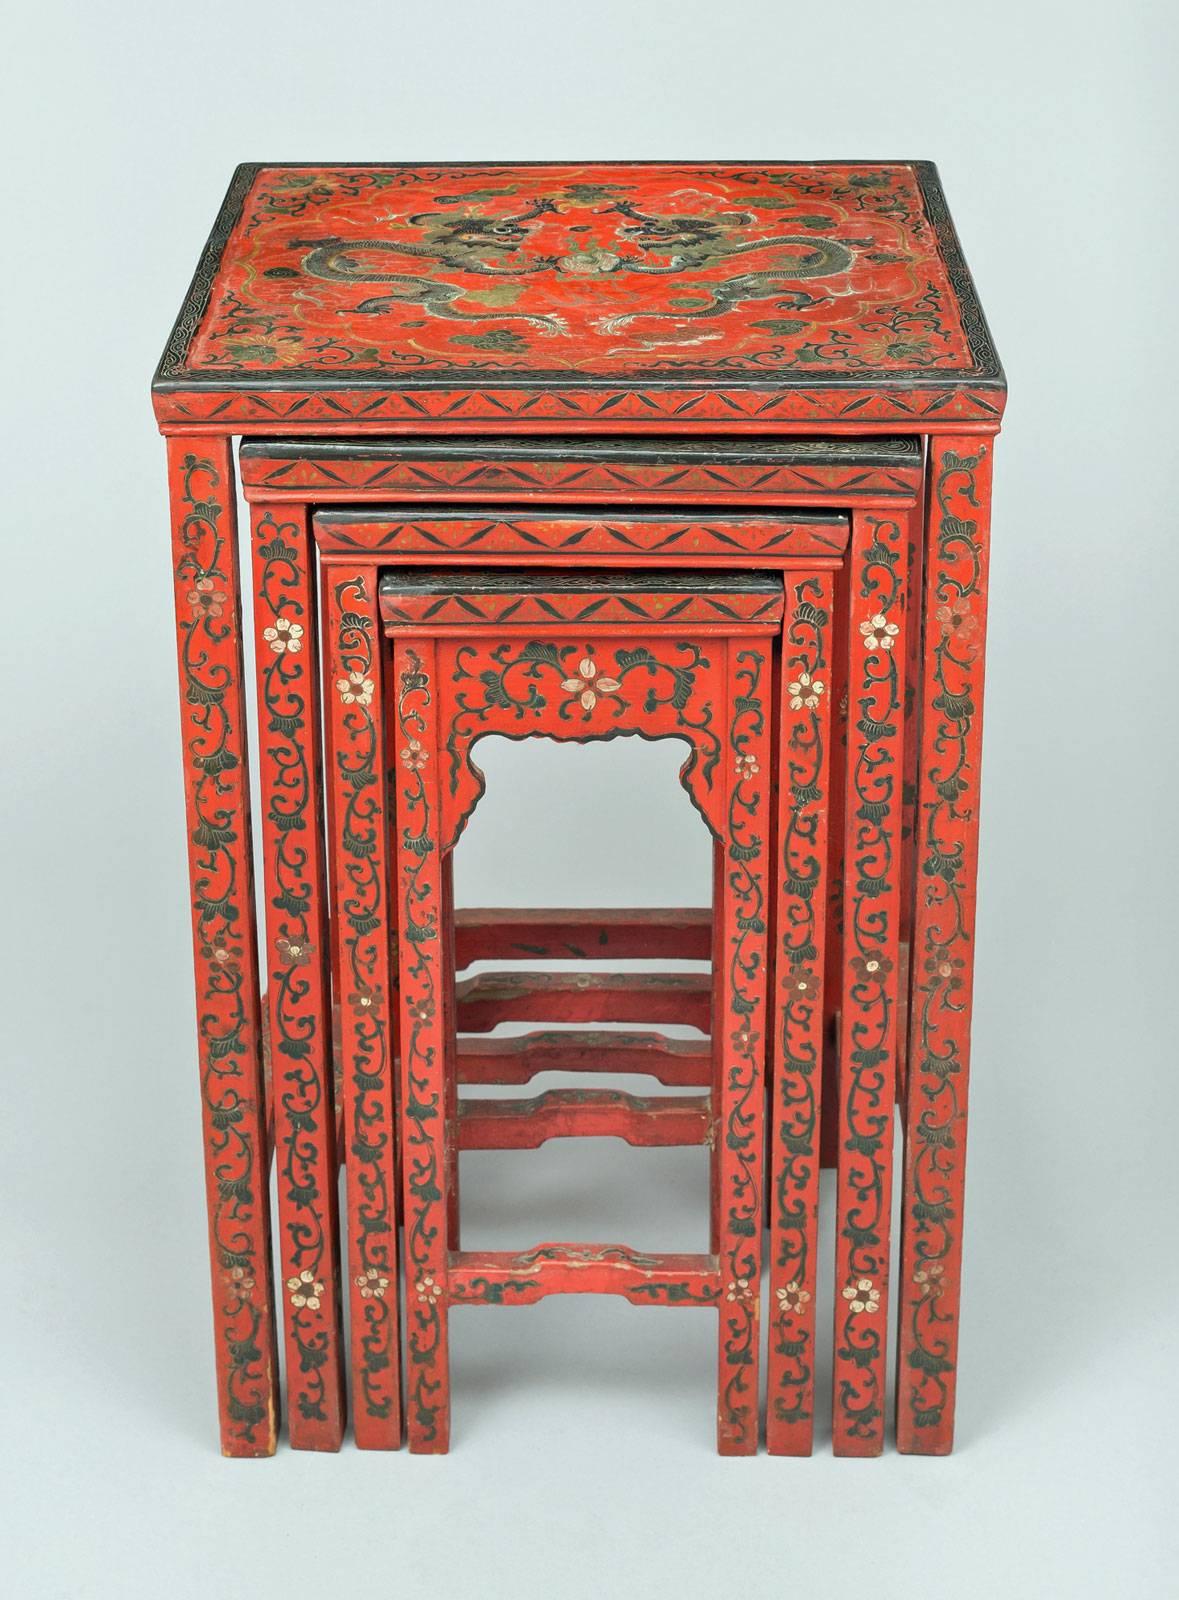 Chinese lacquered nest of four graduated “quarteto” or nesting tables, each top is decorated with fantastical dragons on red background  above shaped aprons.  All decorated with swags and garlands of foliage and flowers.

    

   
